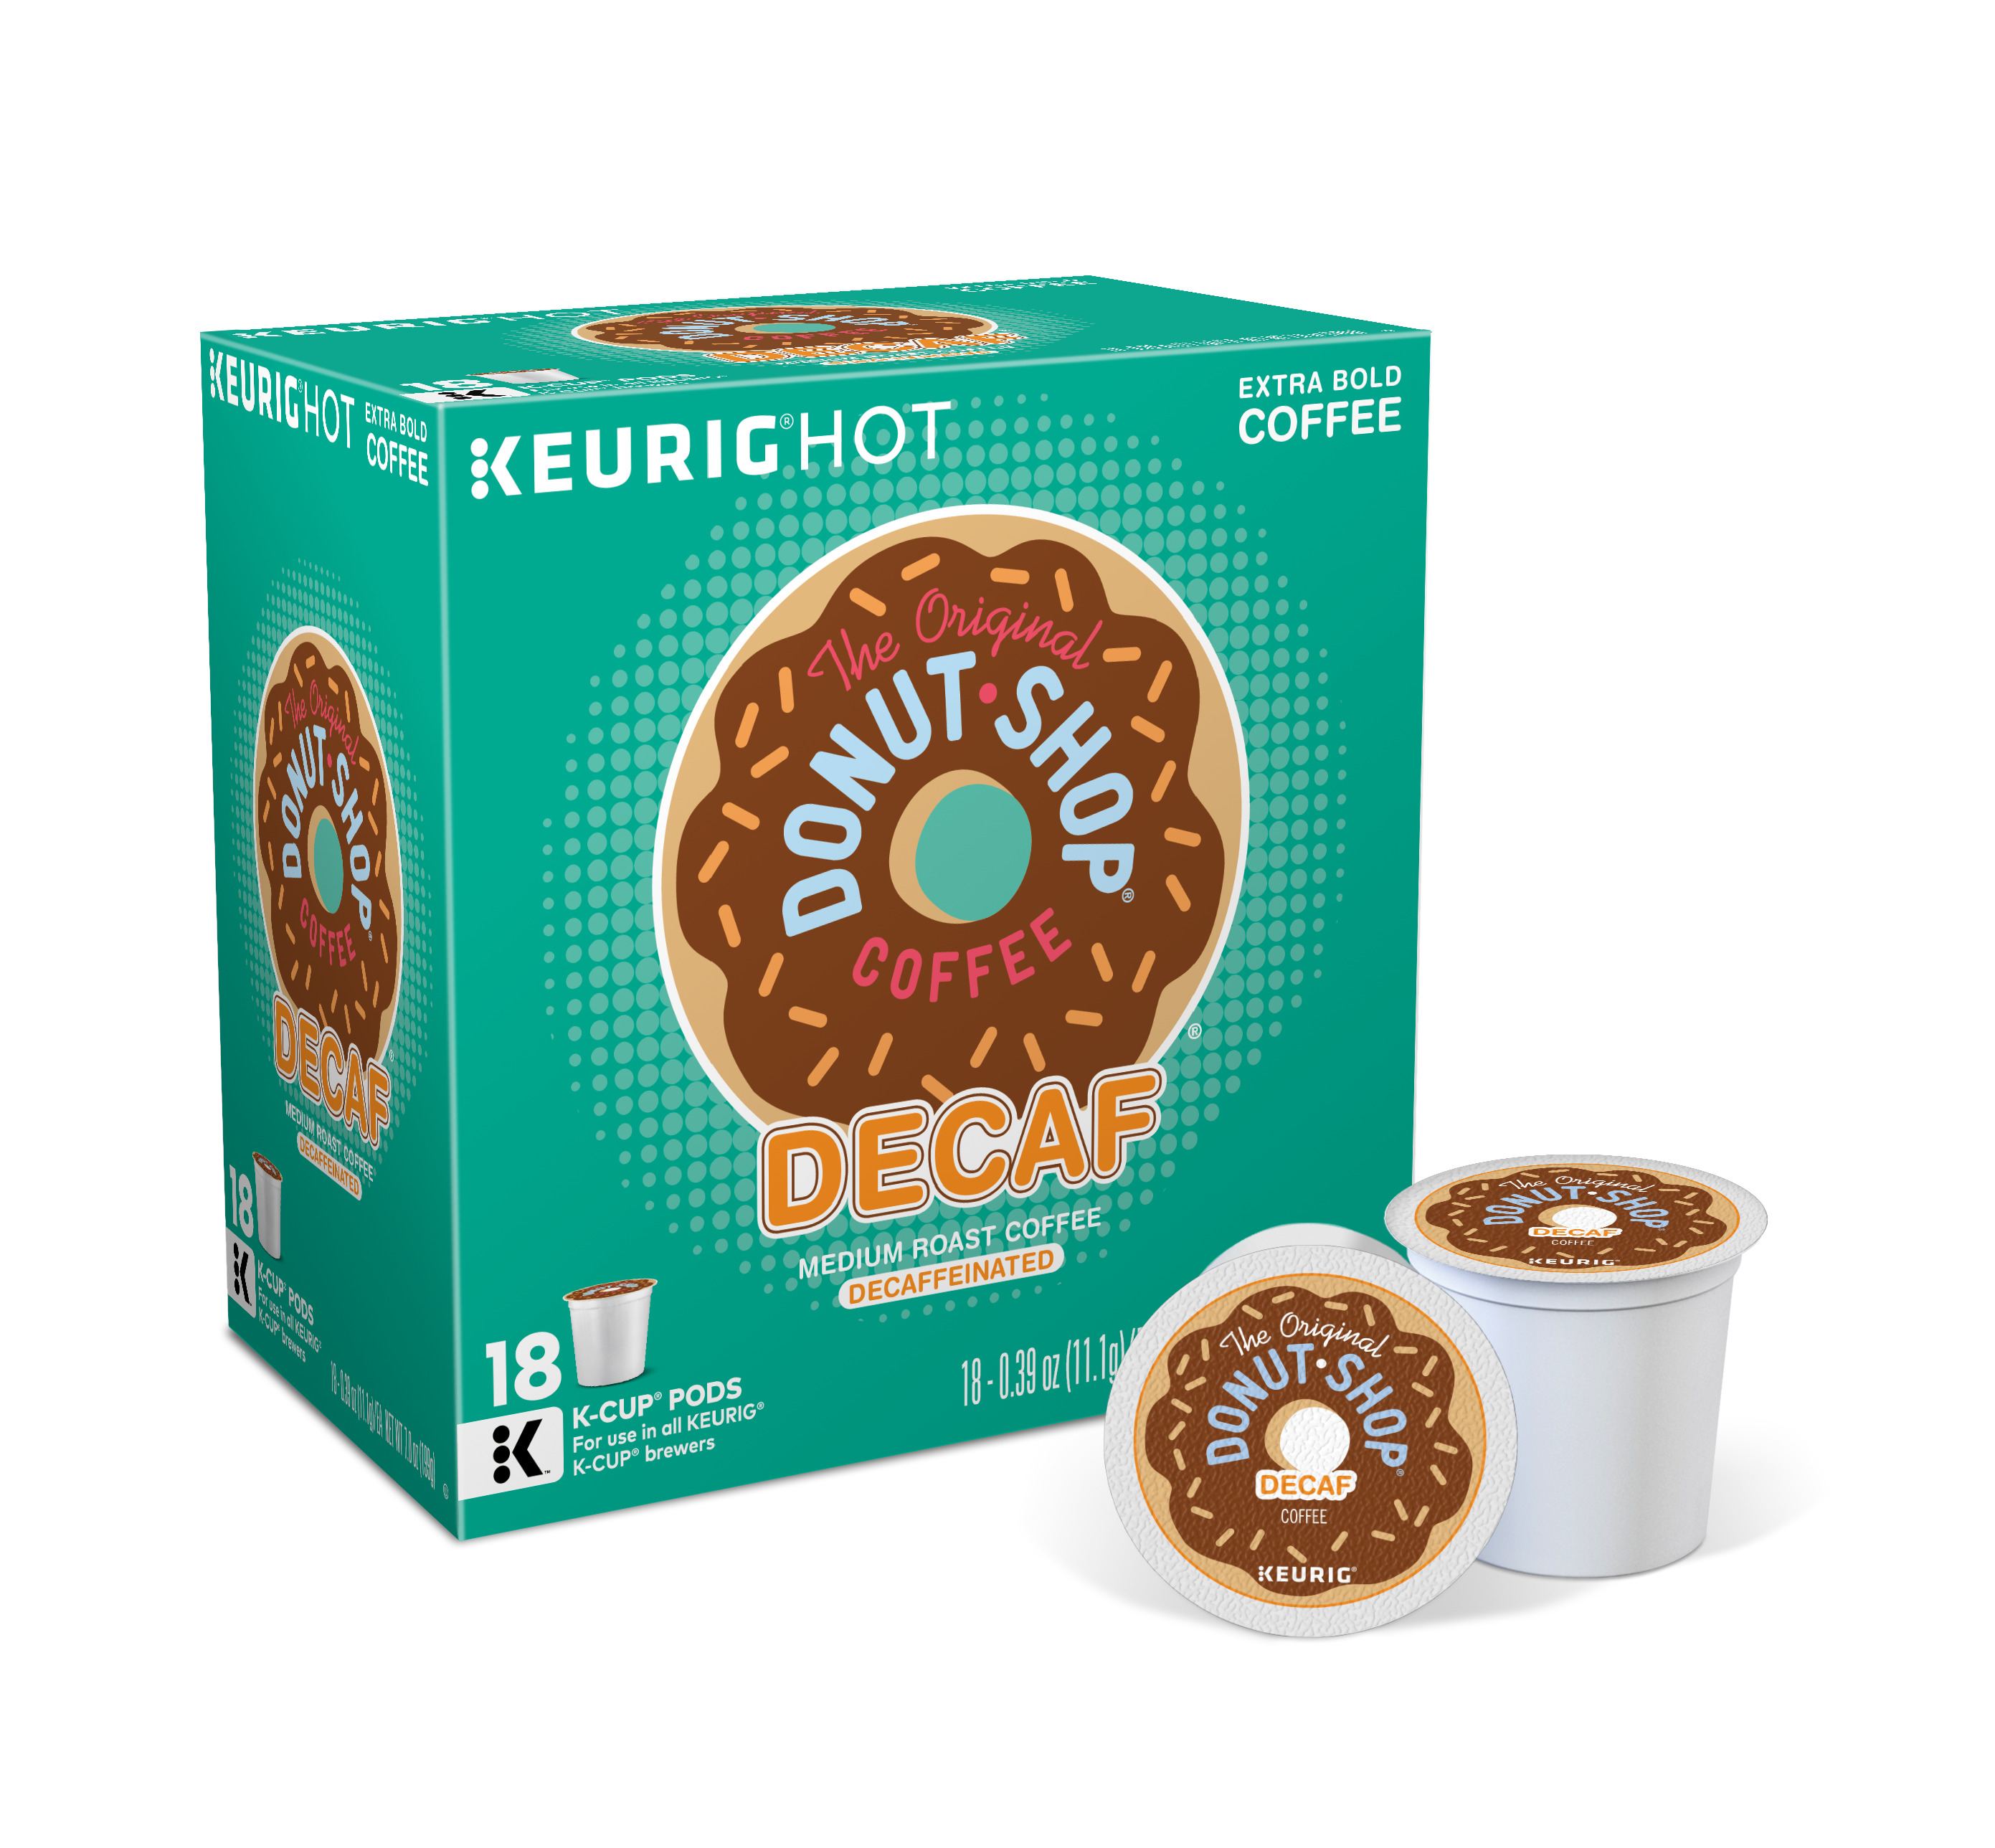 The Original Donut Shop Decaf K-Cup Coffee Pods, Medium Roast, 18 Count for Keurig Brewers - image 1 of 11